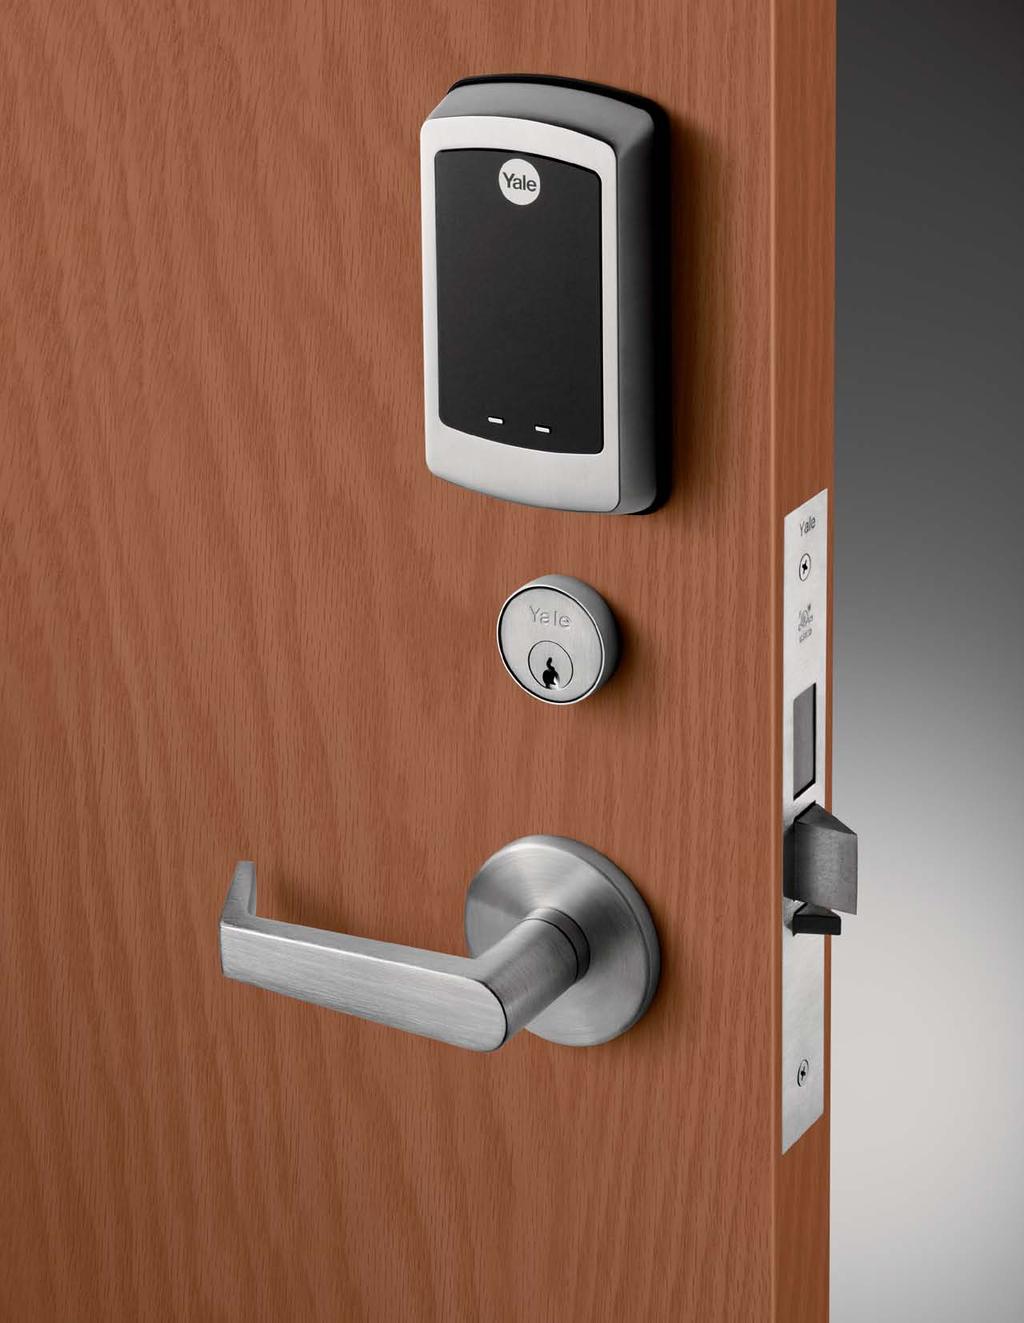 Touchscreen shown when activated Weather Resistant Seal Lockout Mode Low Battery Indication 9V Battery Power Backup Optional Security Deadbolt